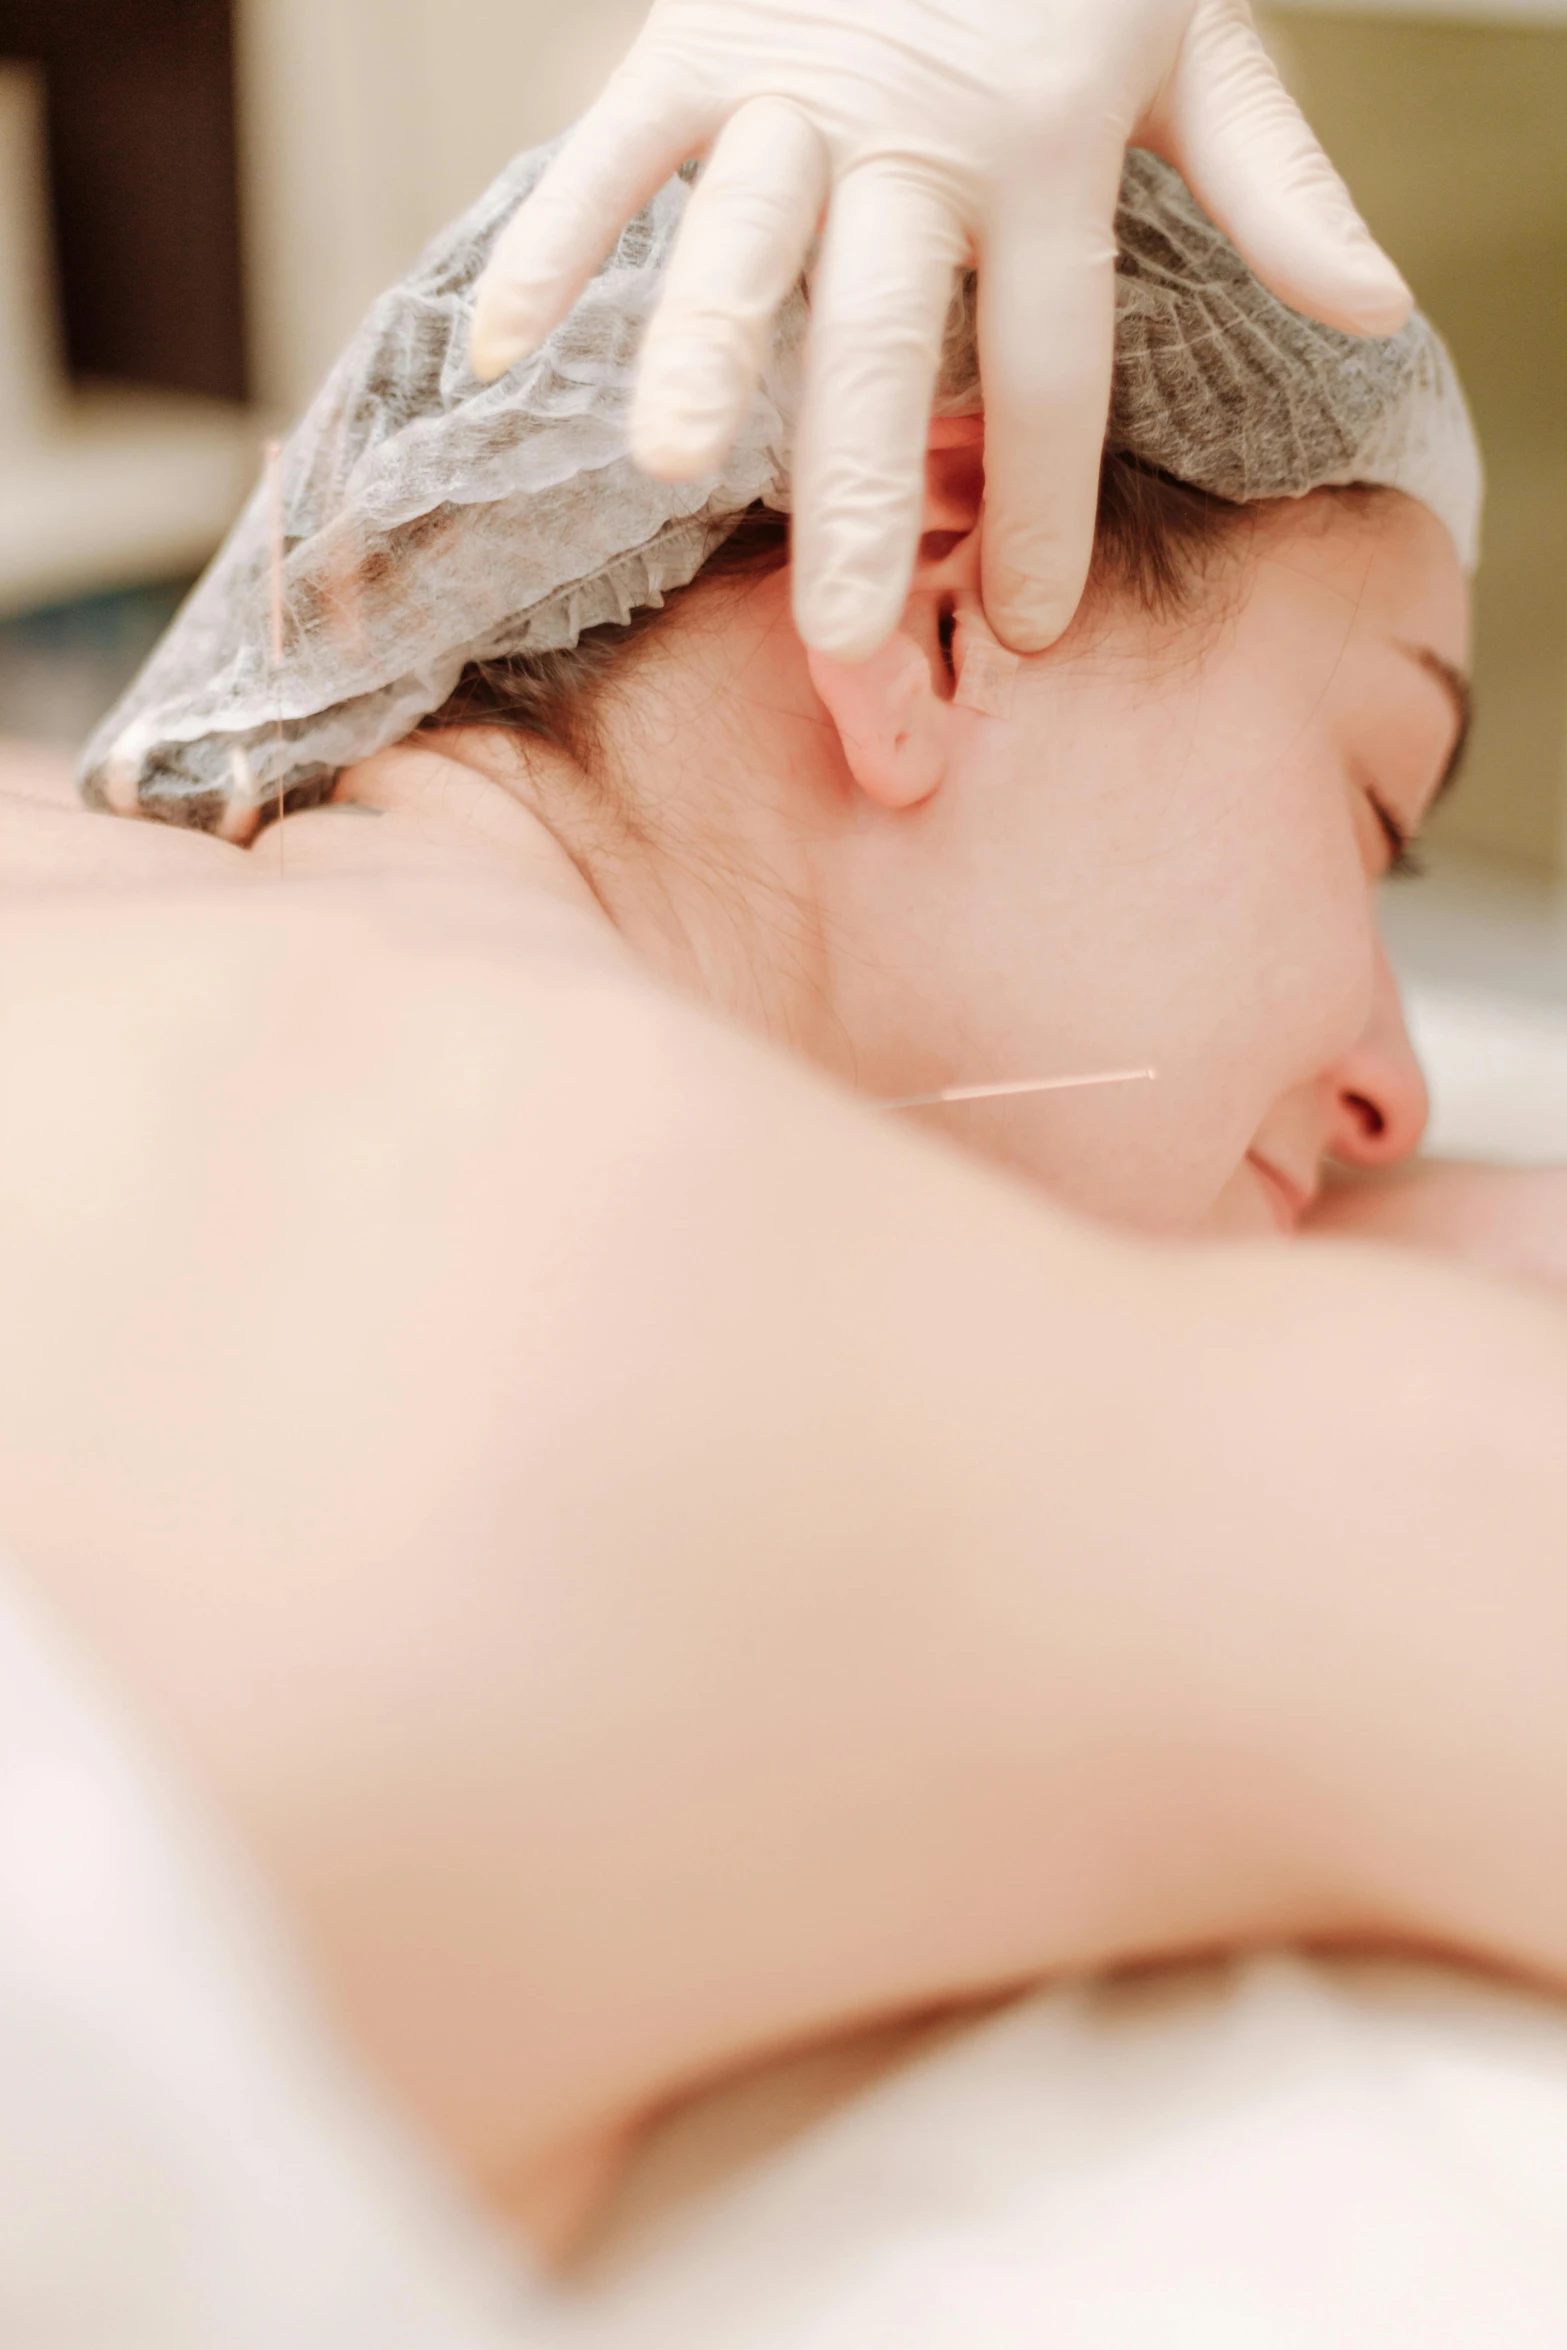 a woman getting a facial massage at a spa, an album cover, shutterstock, renaissance, acupuncture treatment, grayish, resting on chest, thumbnail